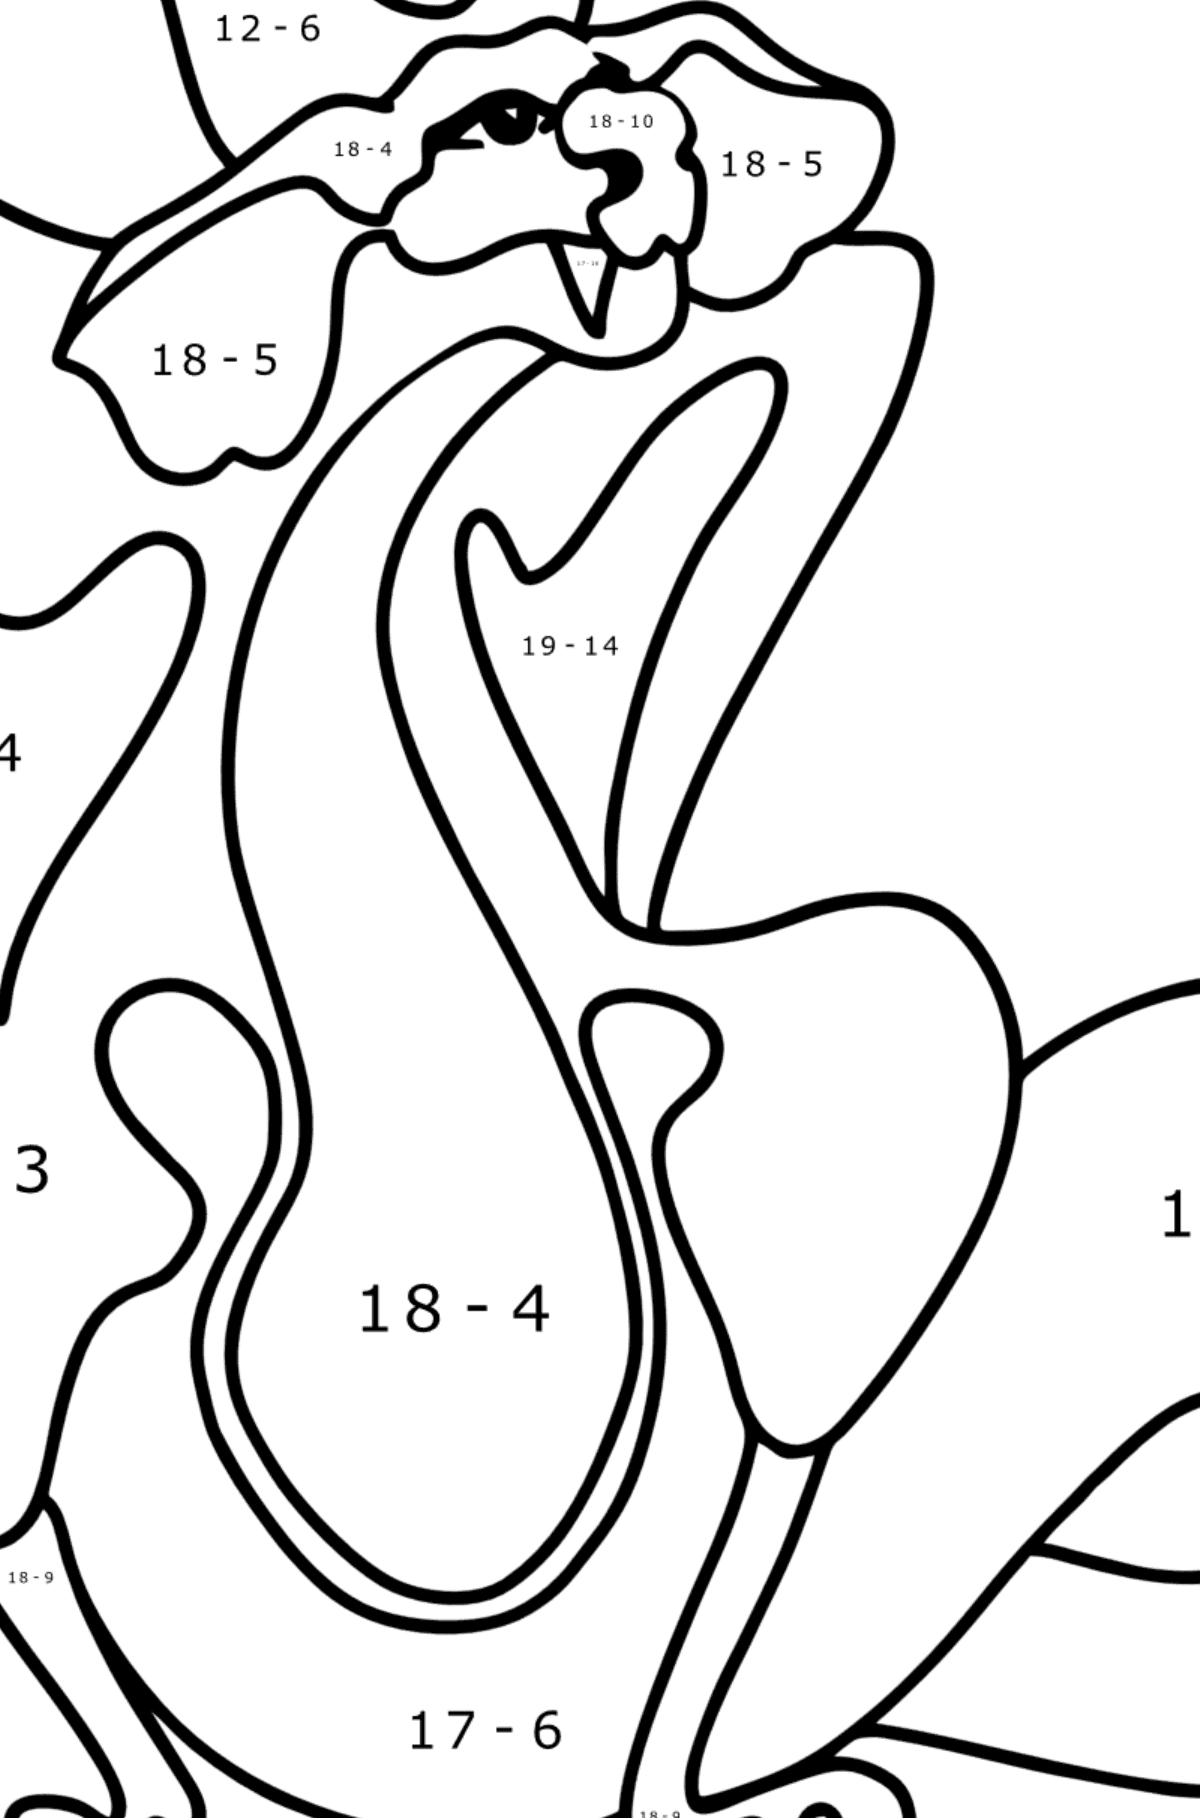 Sad Dragon coloring page - Math Coloring - Subtraction for Kids